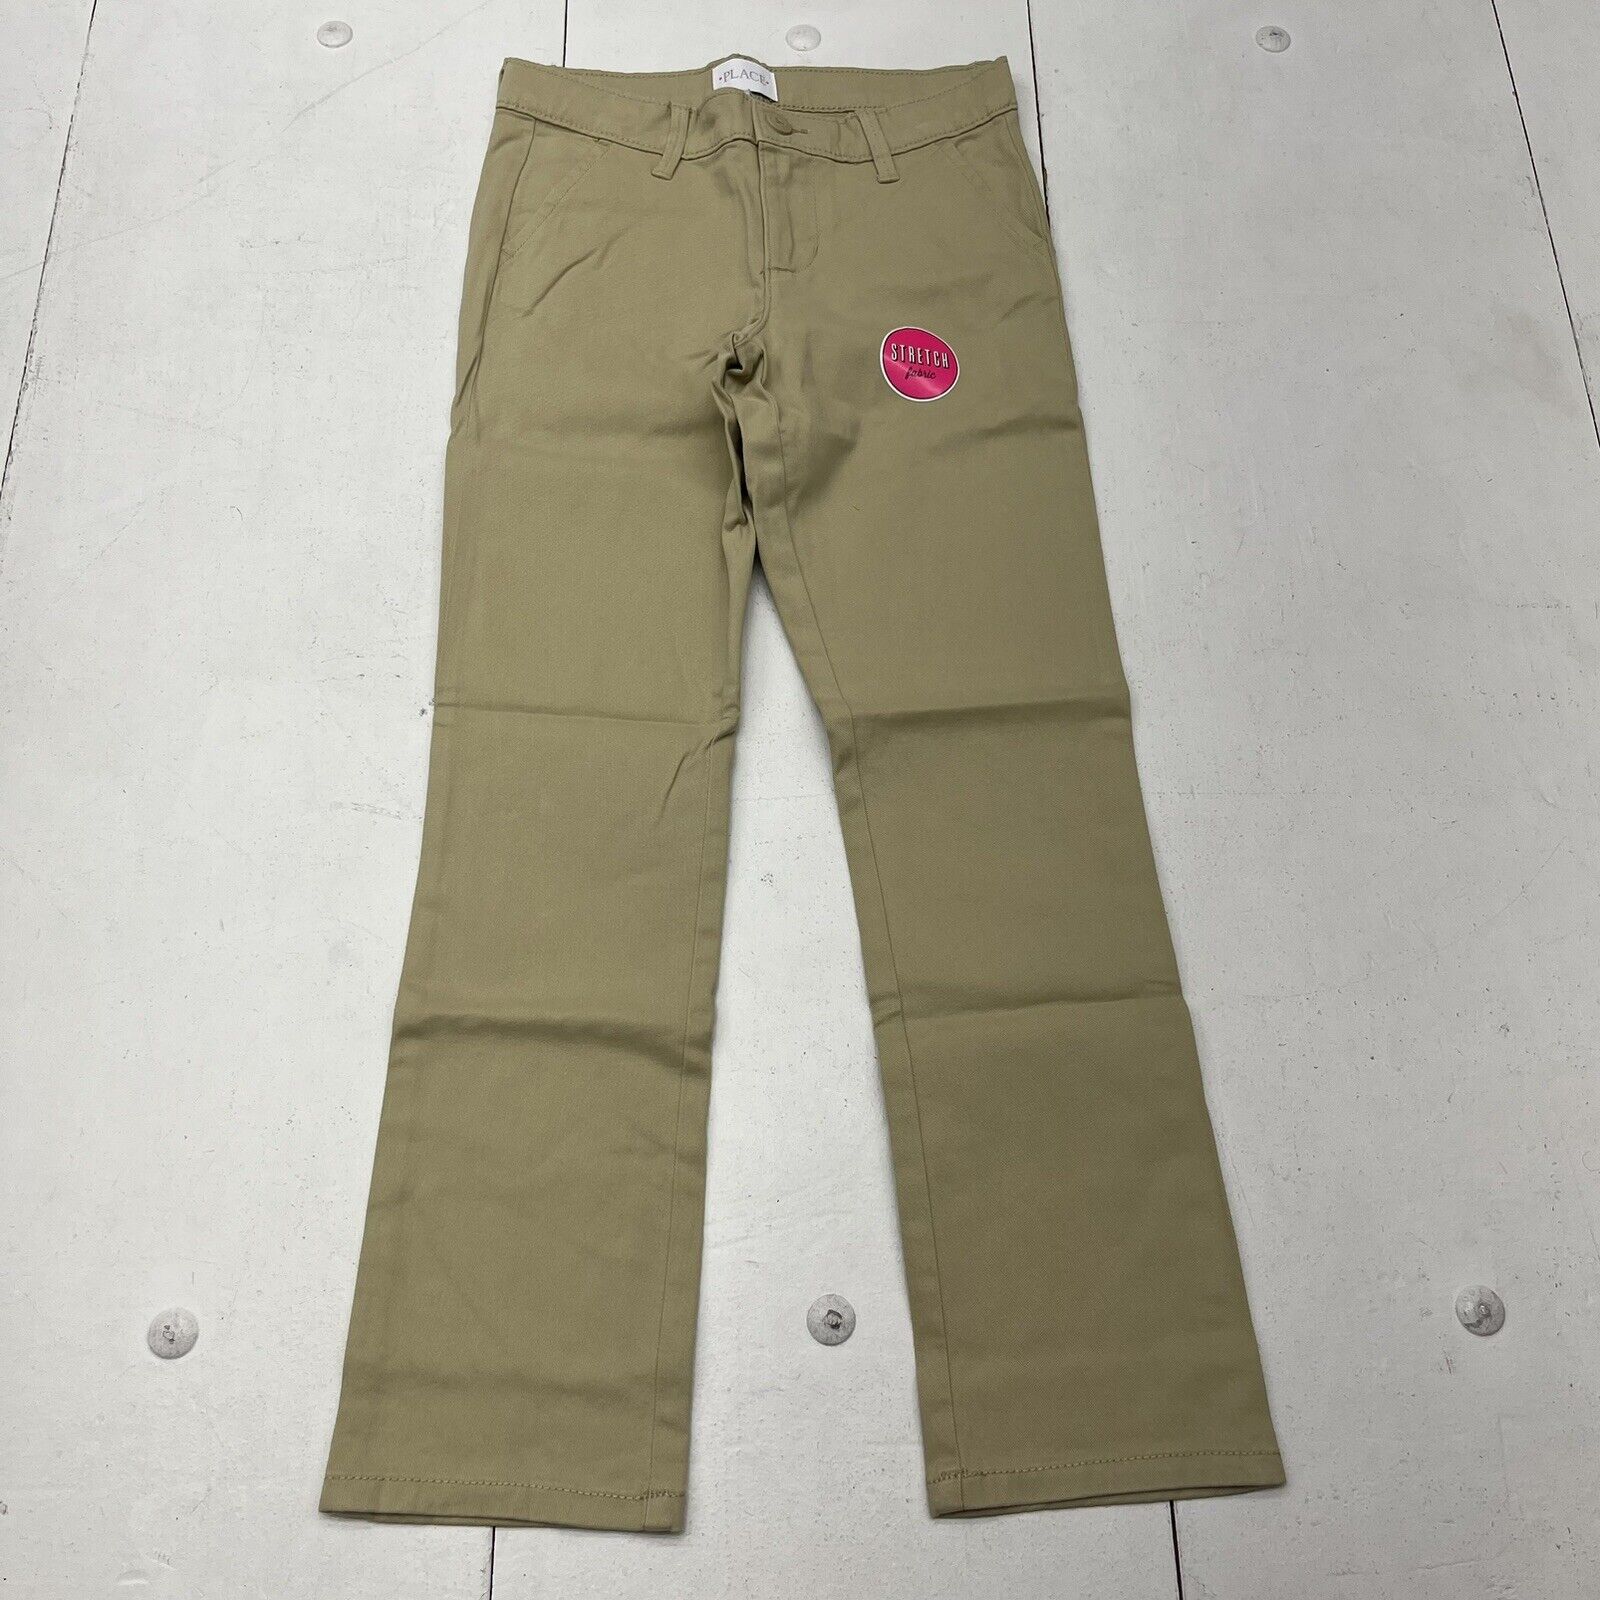 The Children's Place Beige Pants Girls Size 8 NEW - beyond exchange